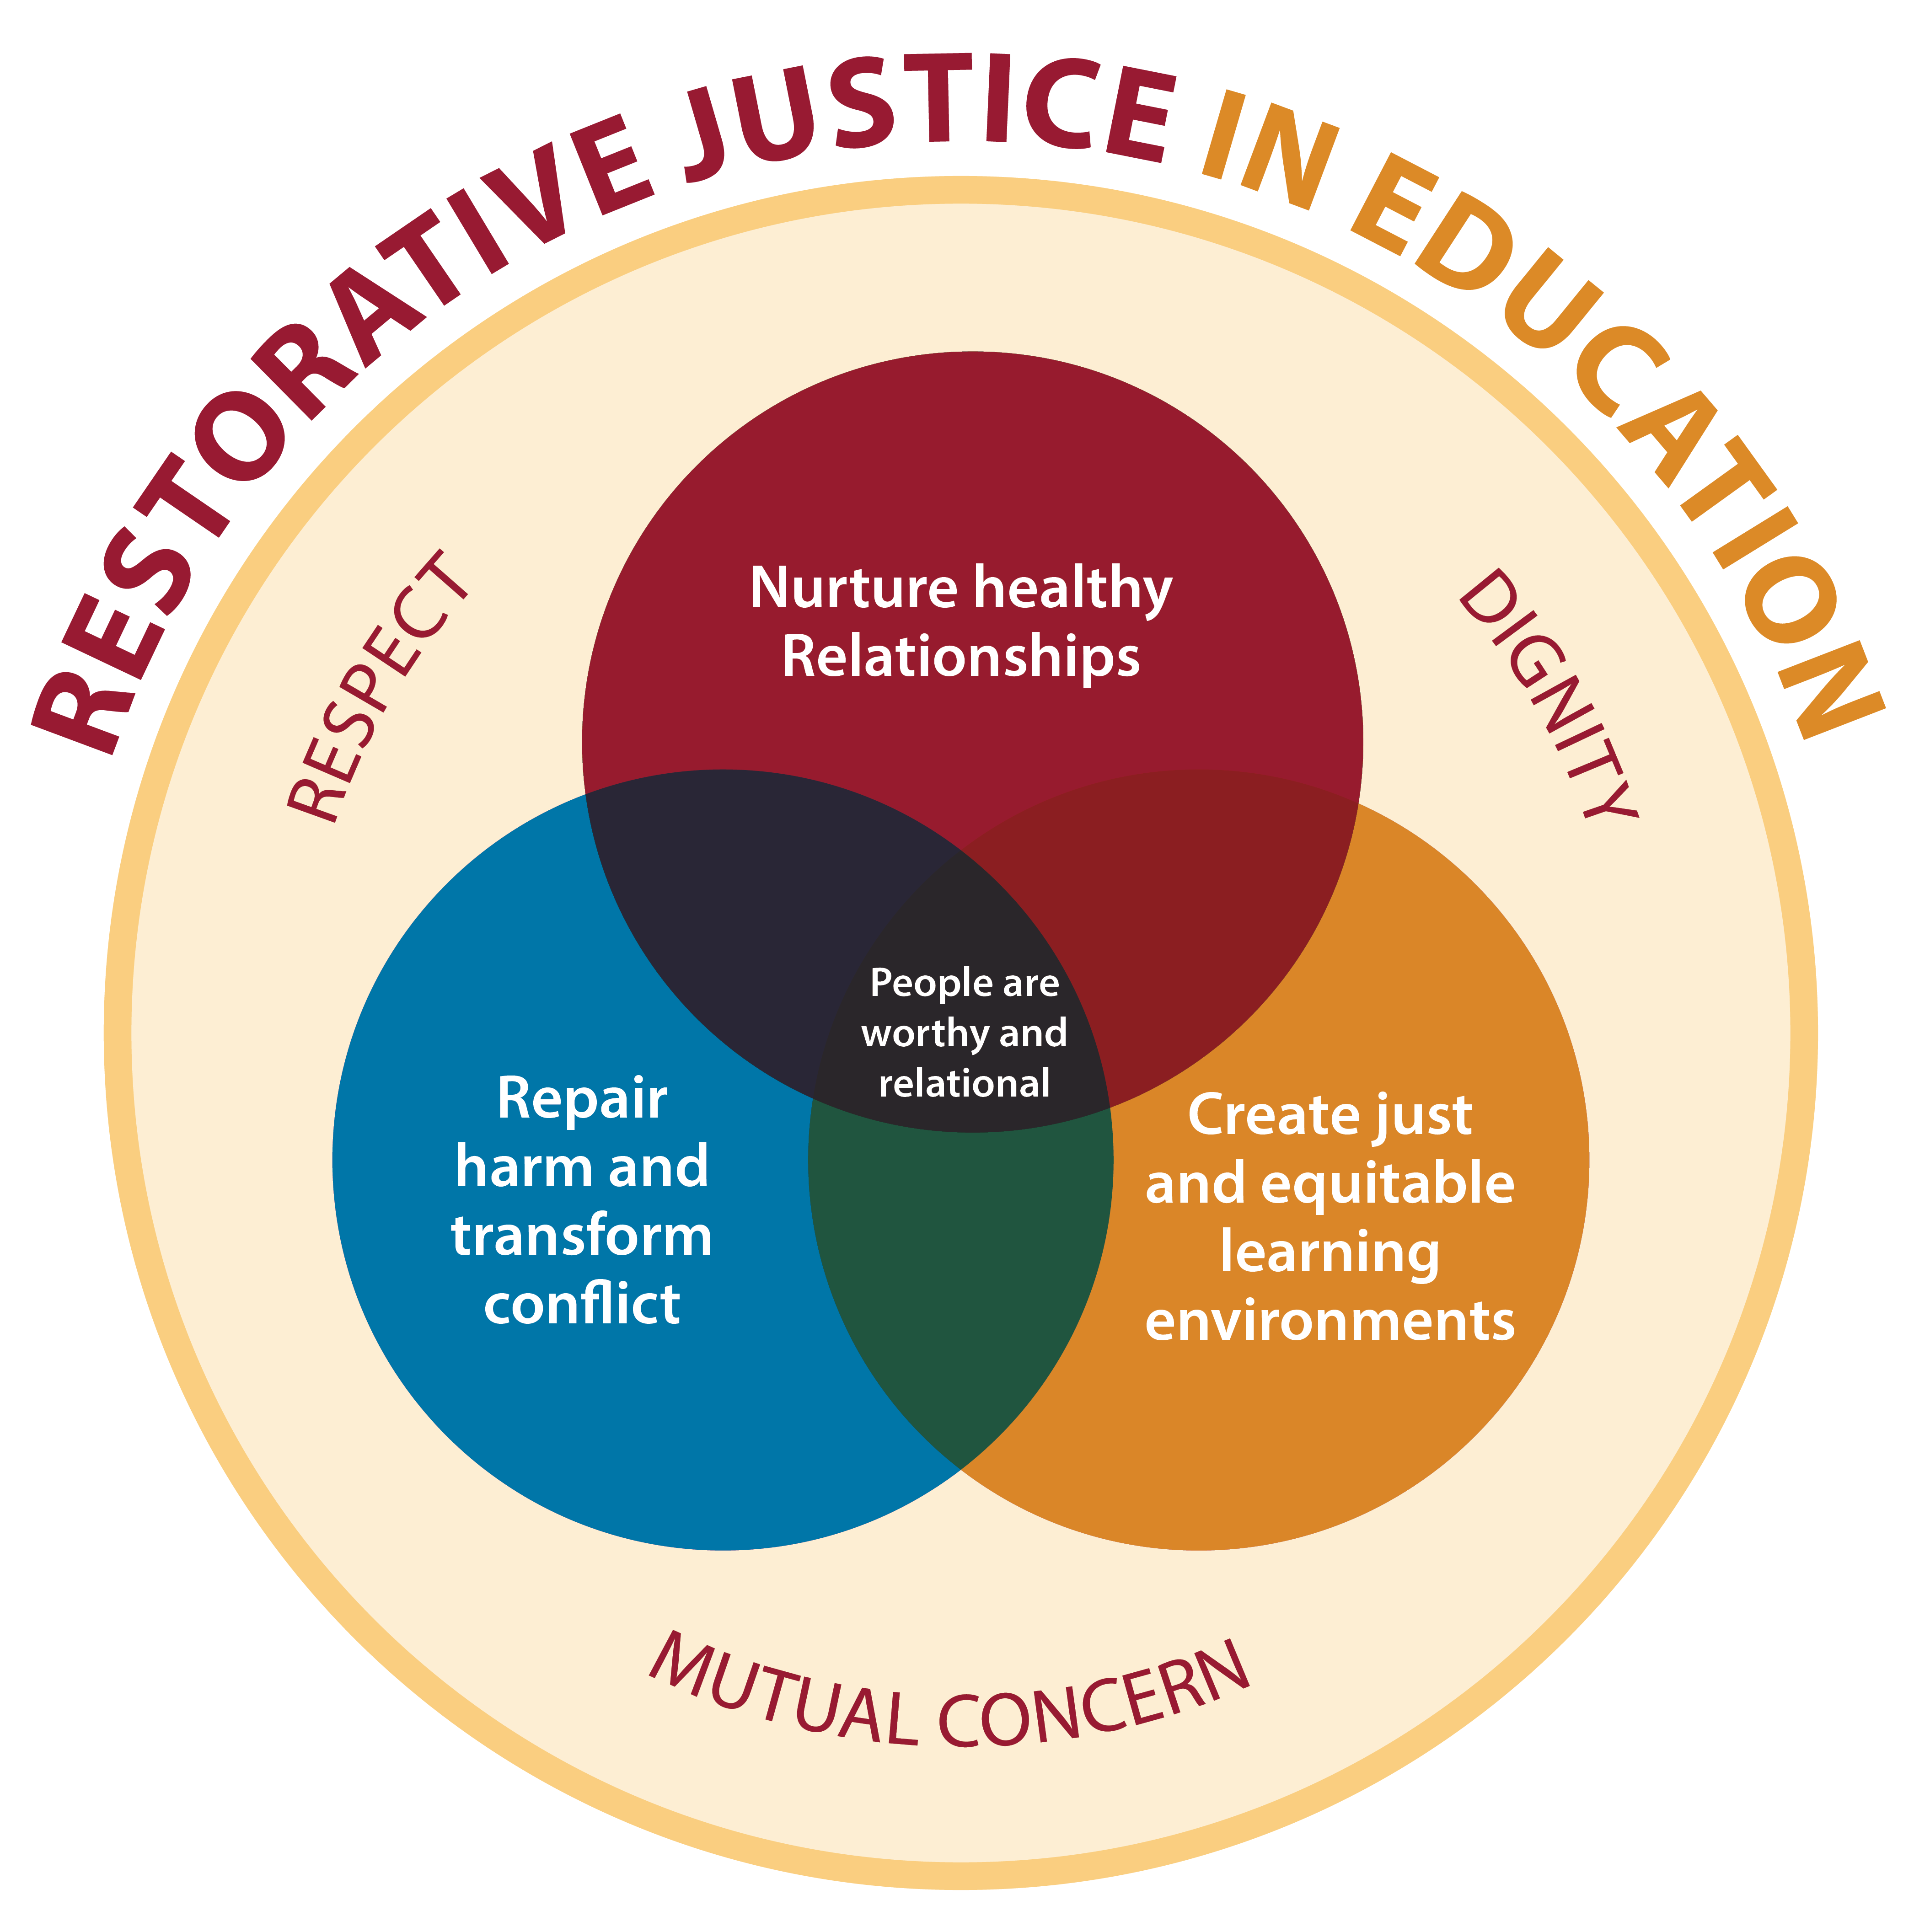 Info graphic of Restorative Justice in Education